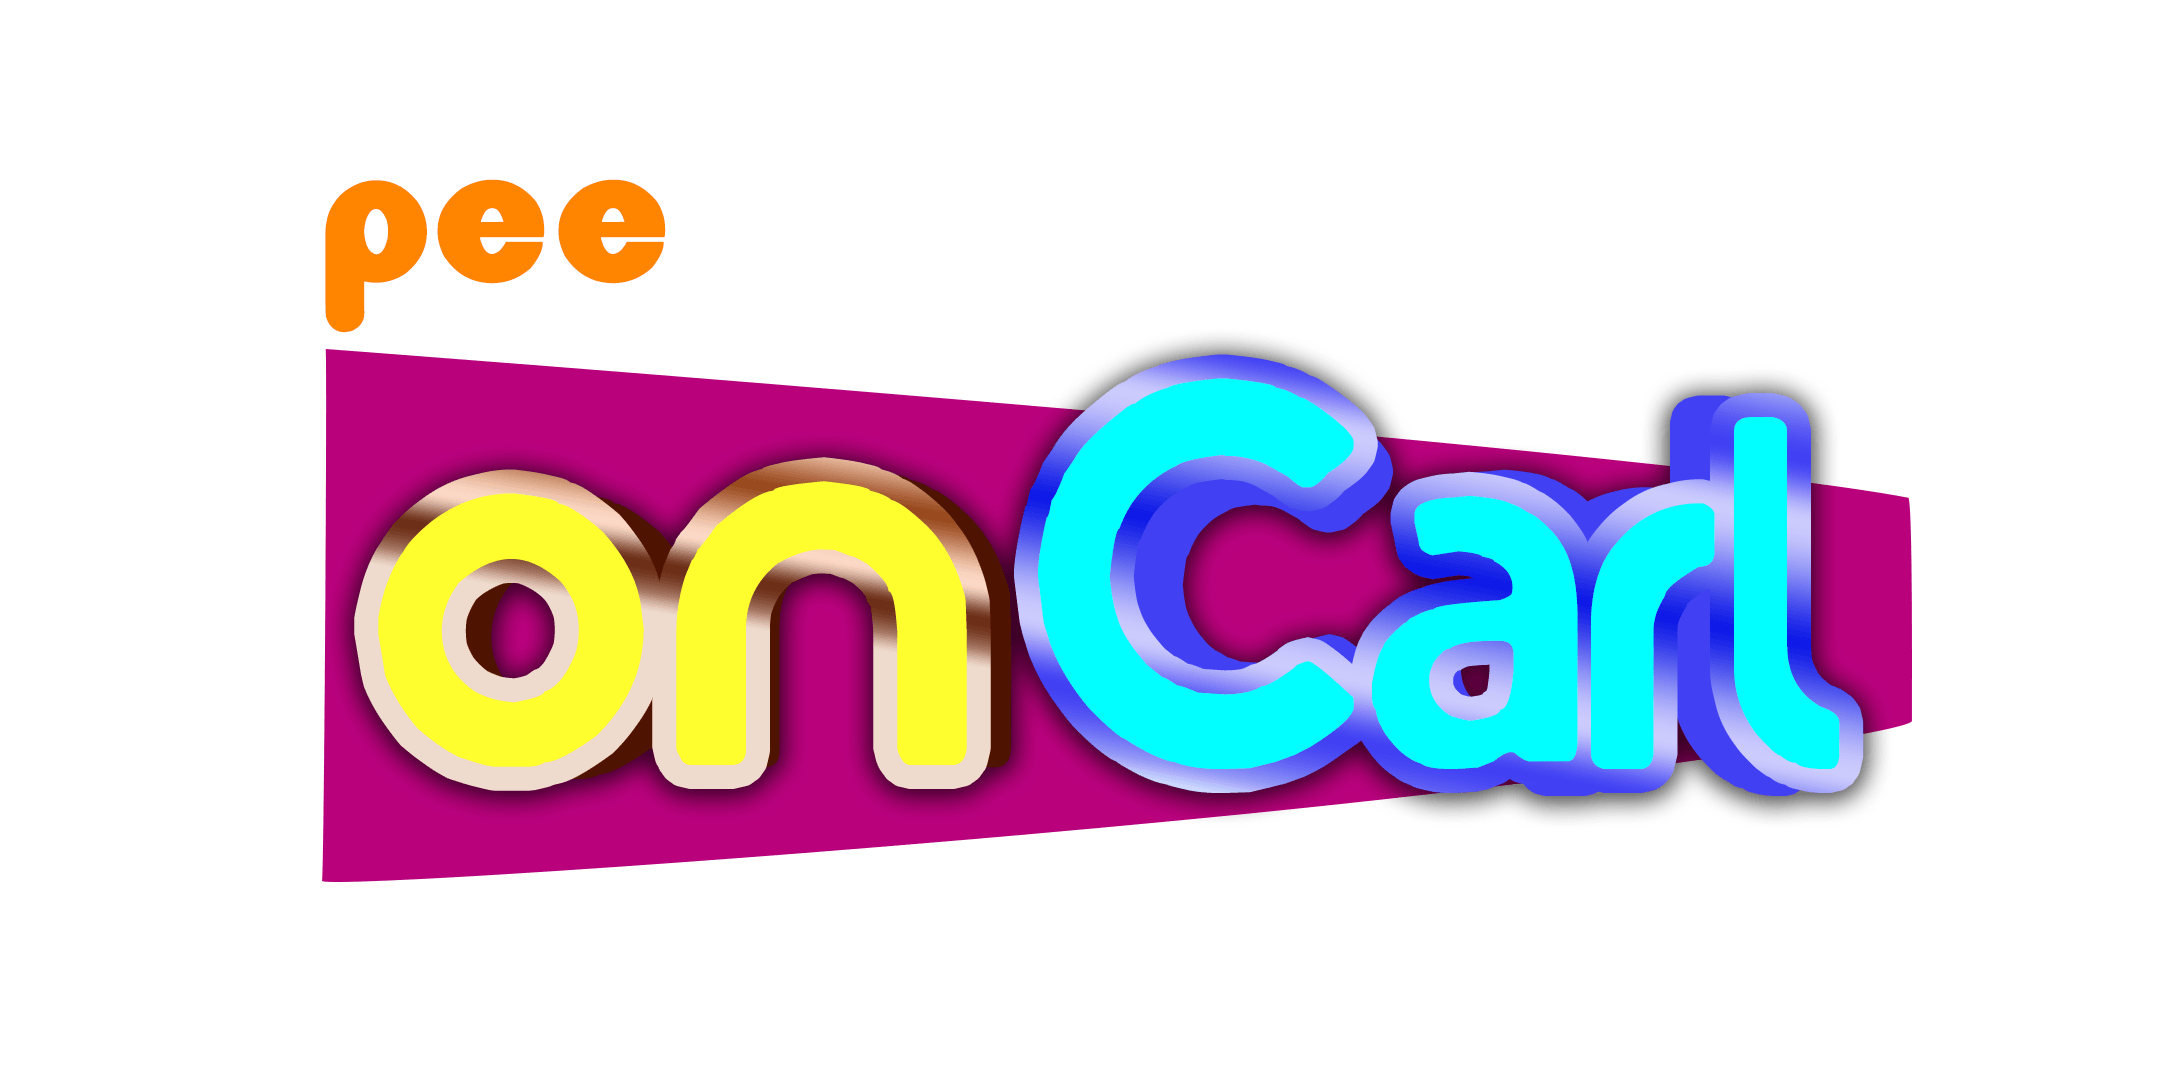 iCarly Logo - please go online to icarly.com : sbubby